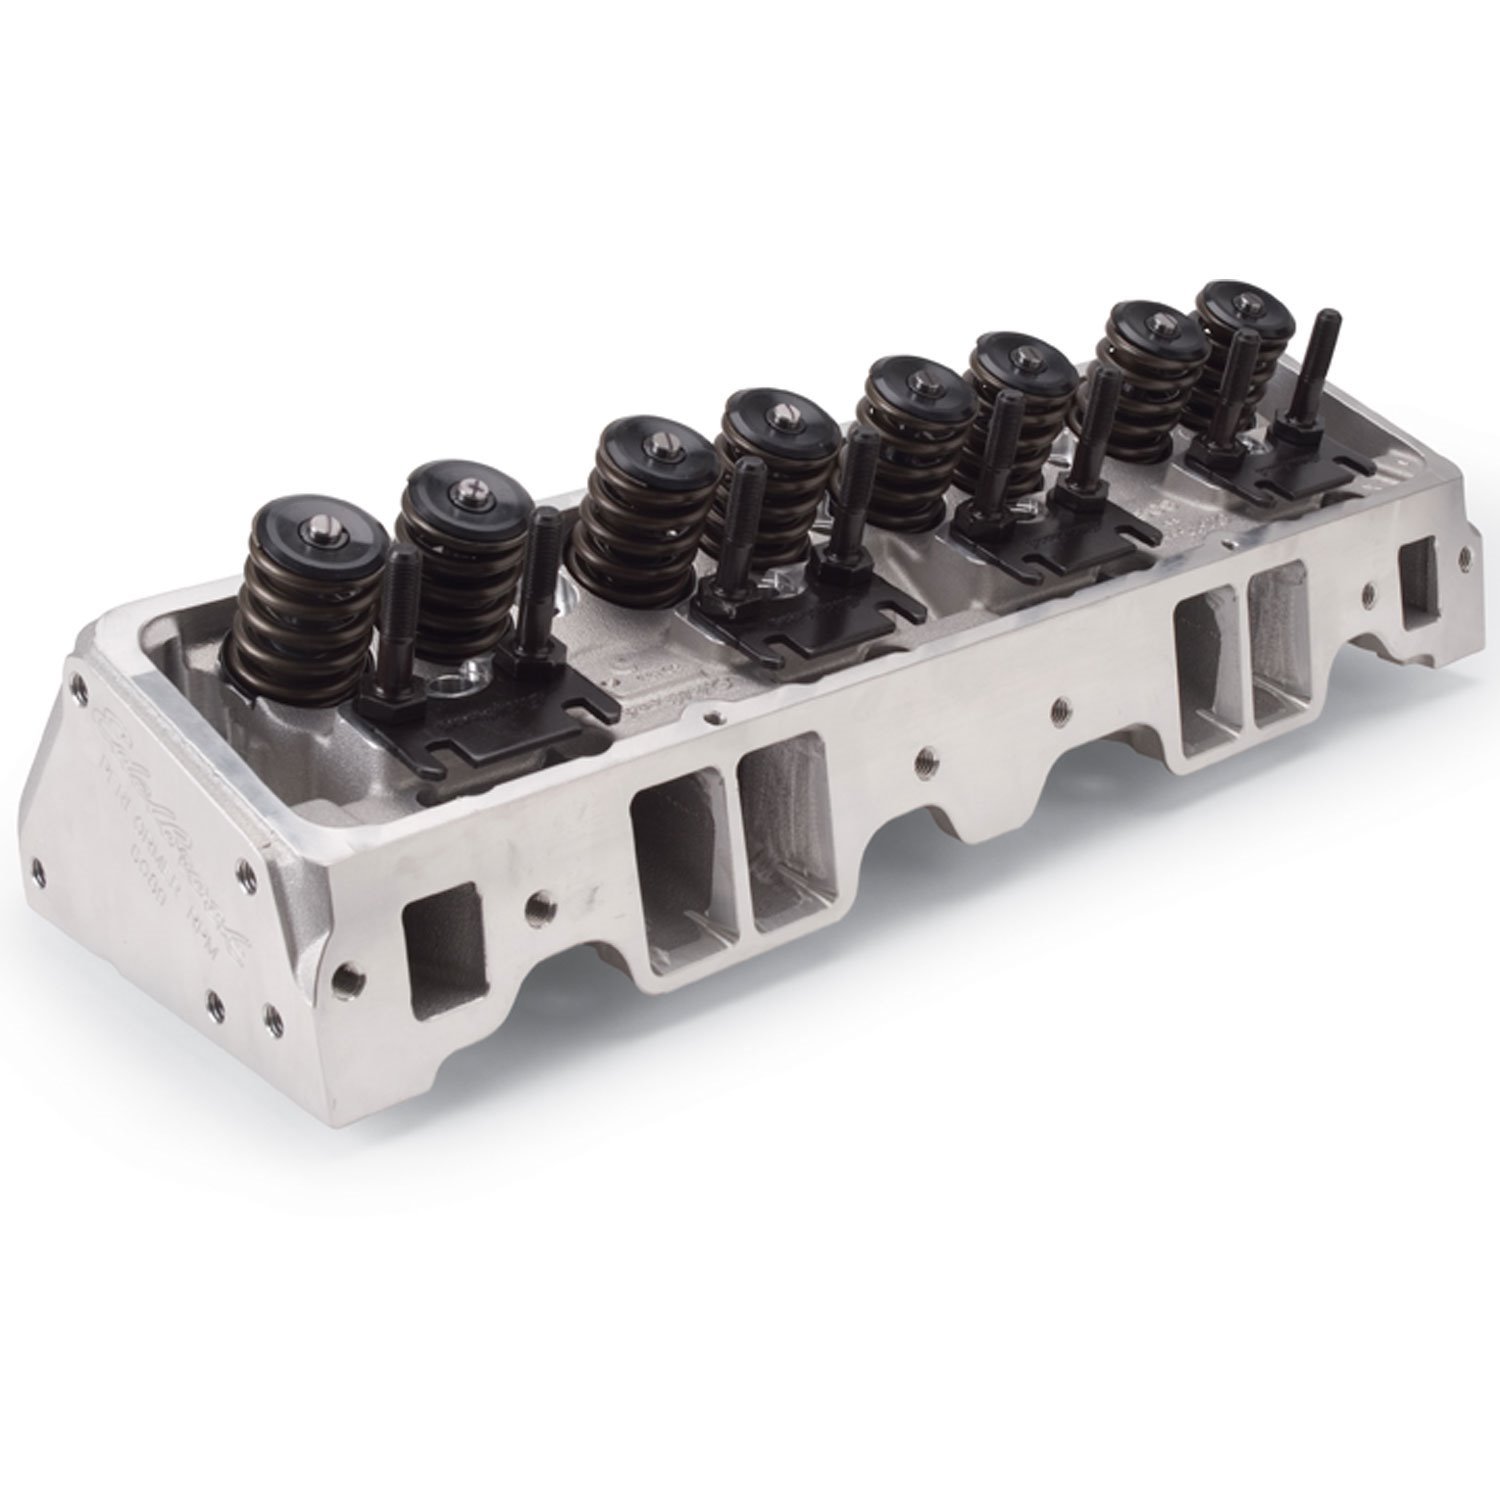 Performer RPM Cylinder Head for Small Block Chevy